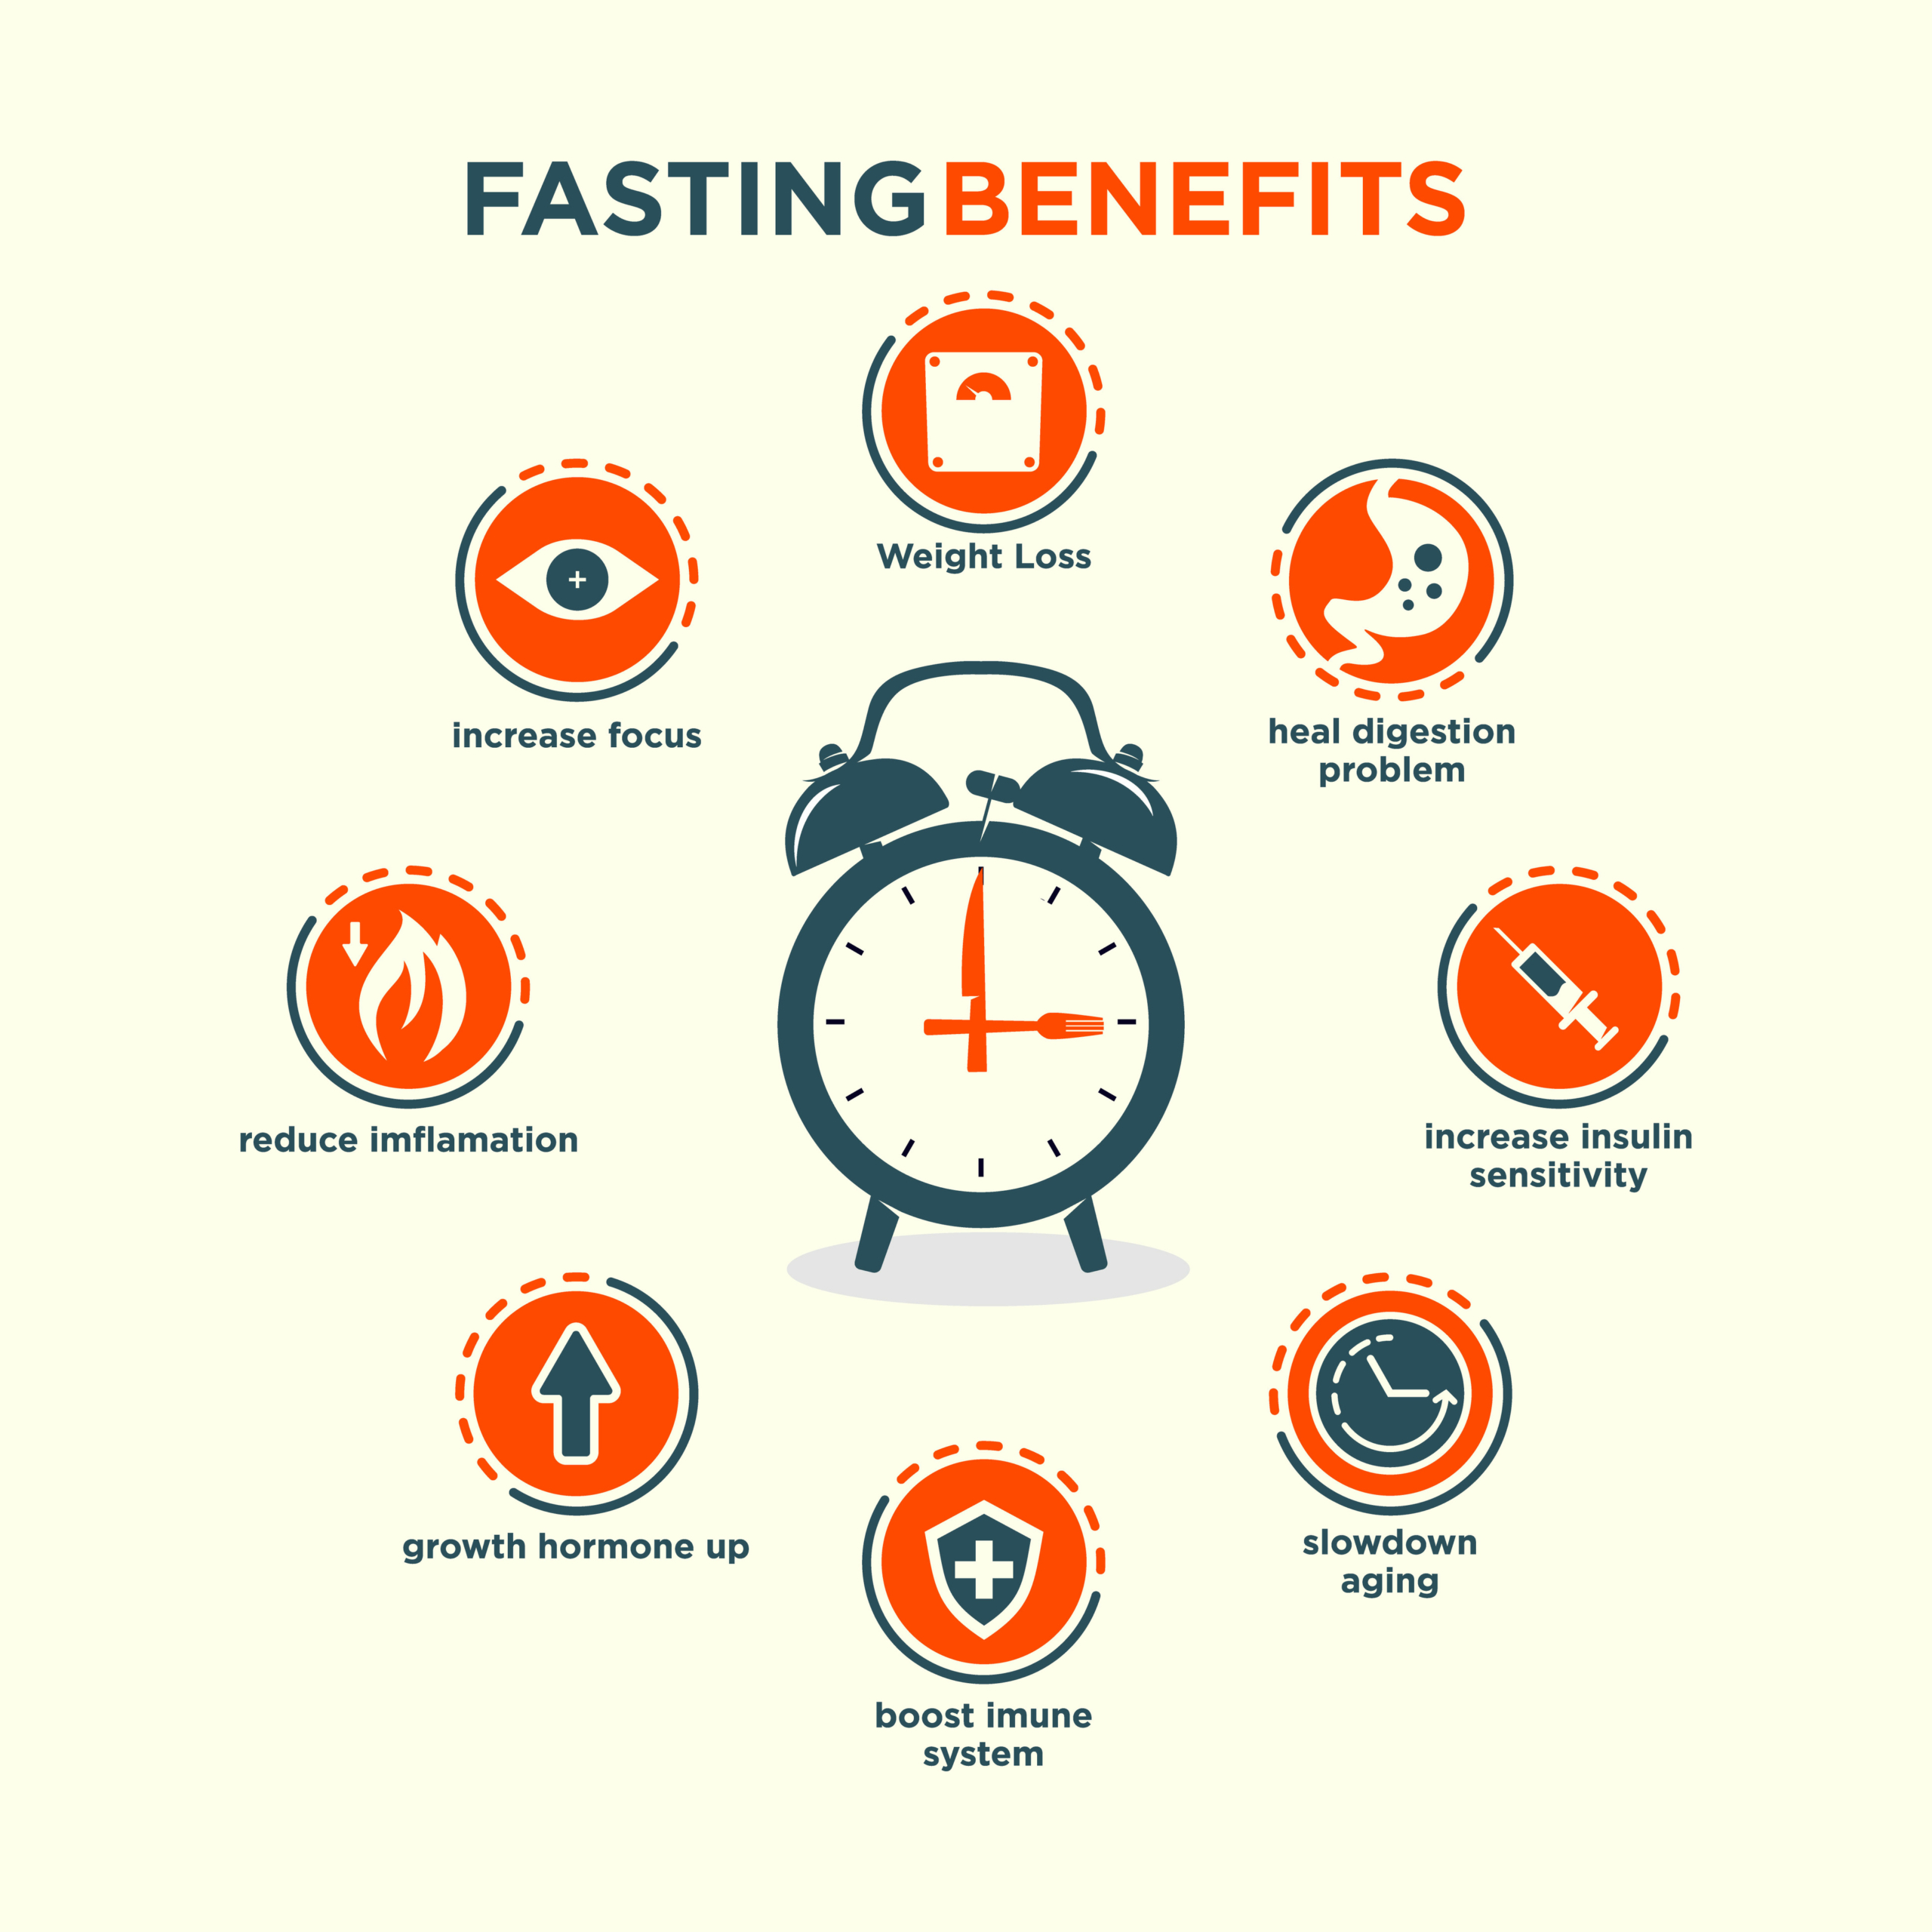 if fasting